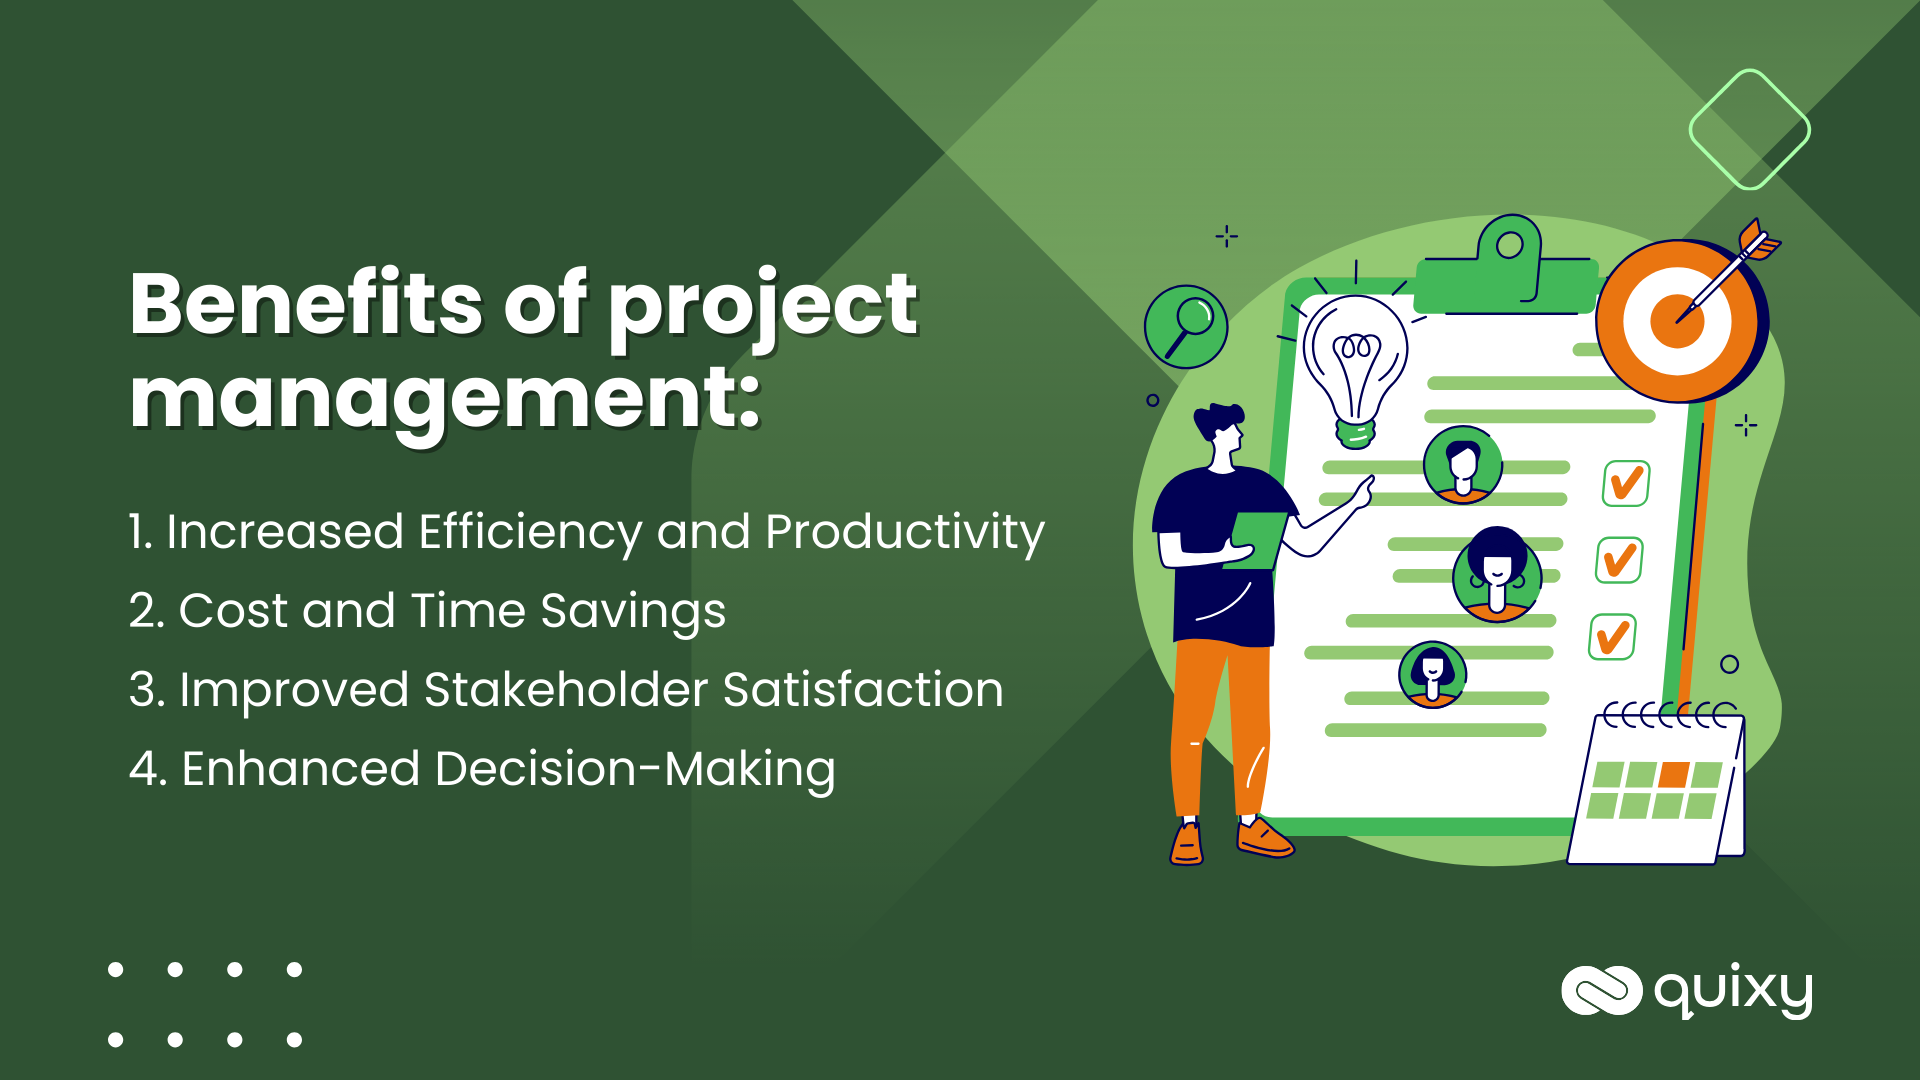 Benefits of project management